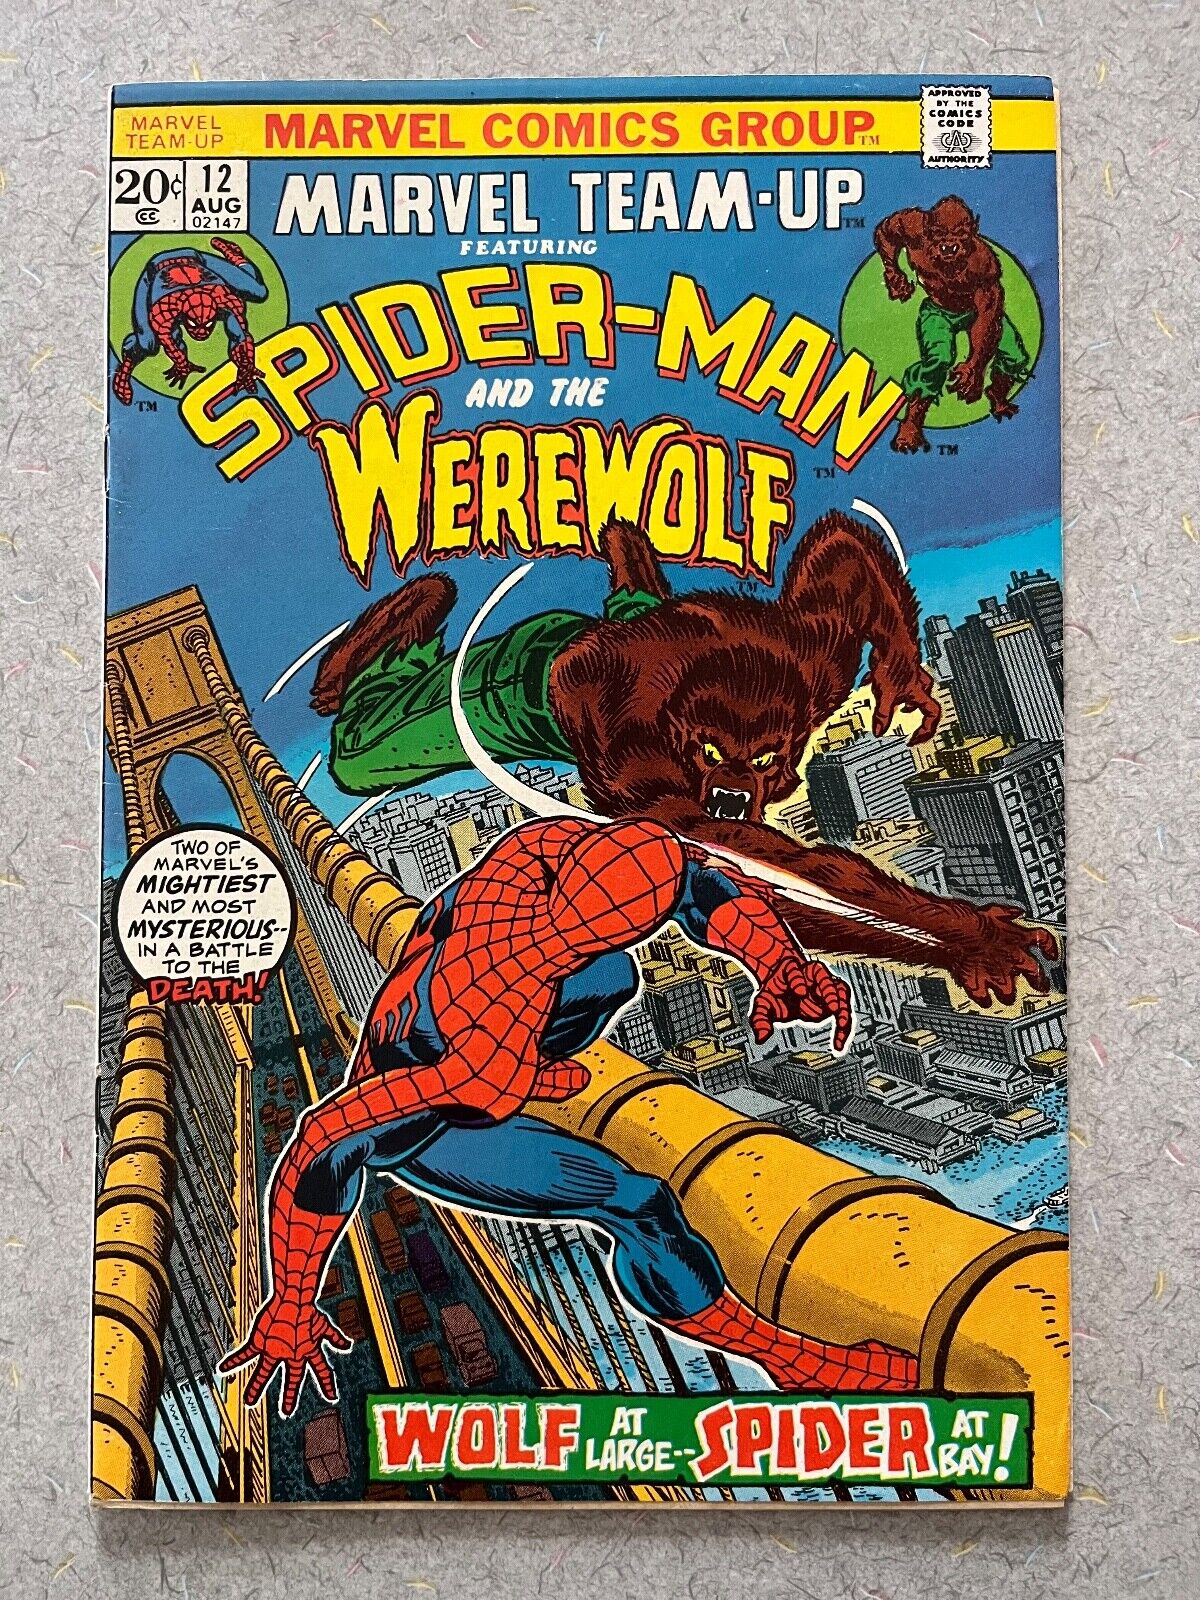 Marvel Team-Up #12 1973 VF Beauty Spider-Man and Werewolf By Night